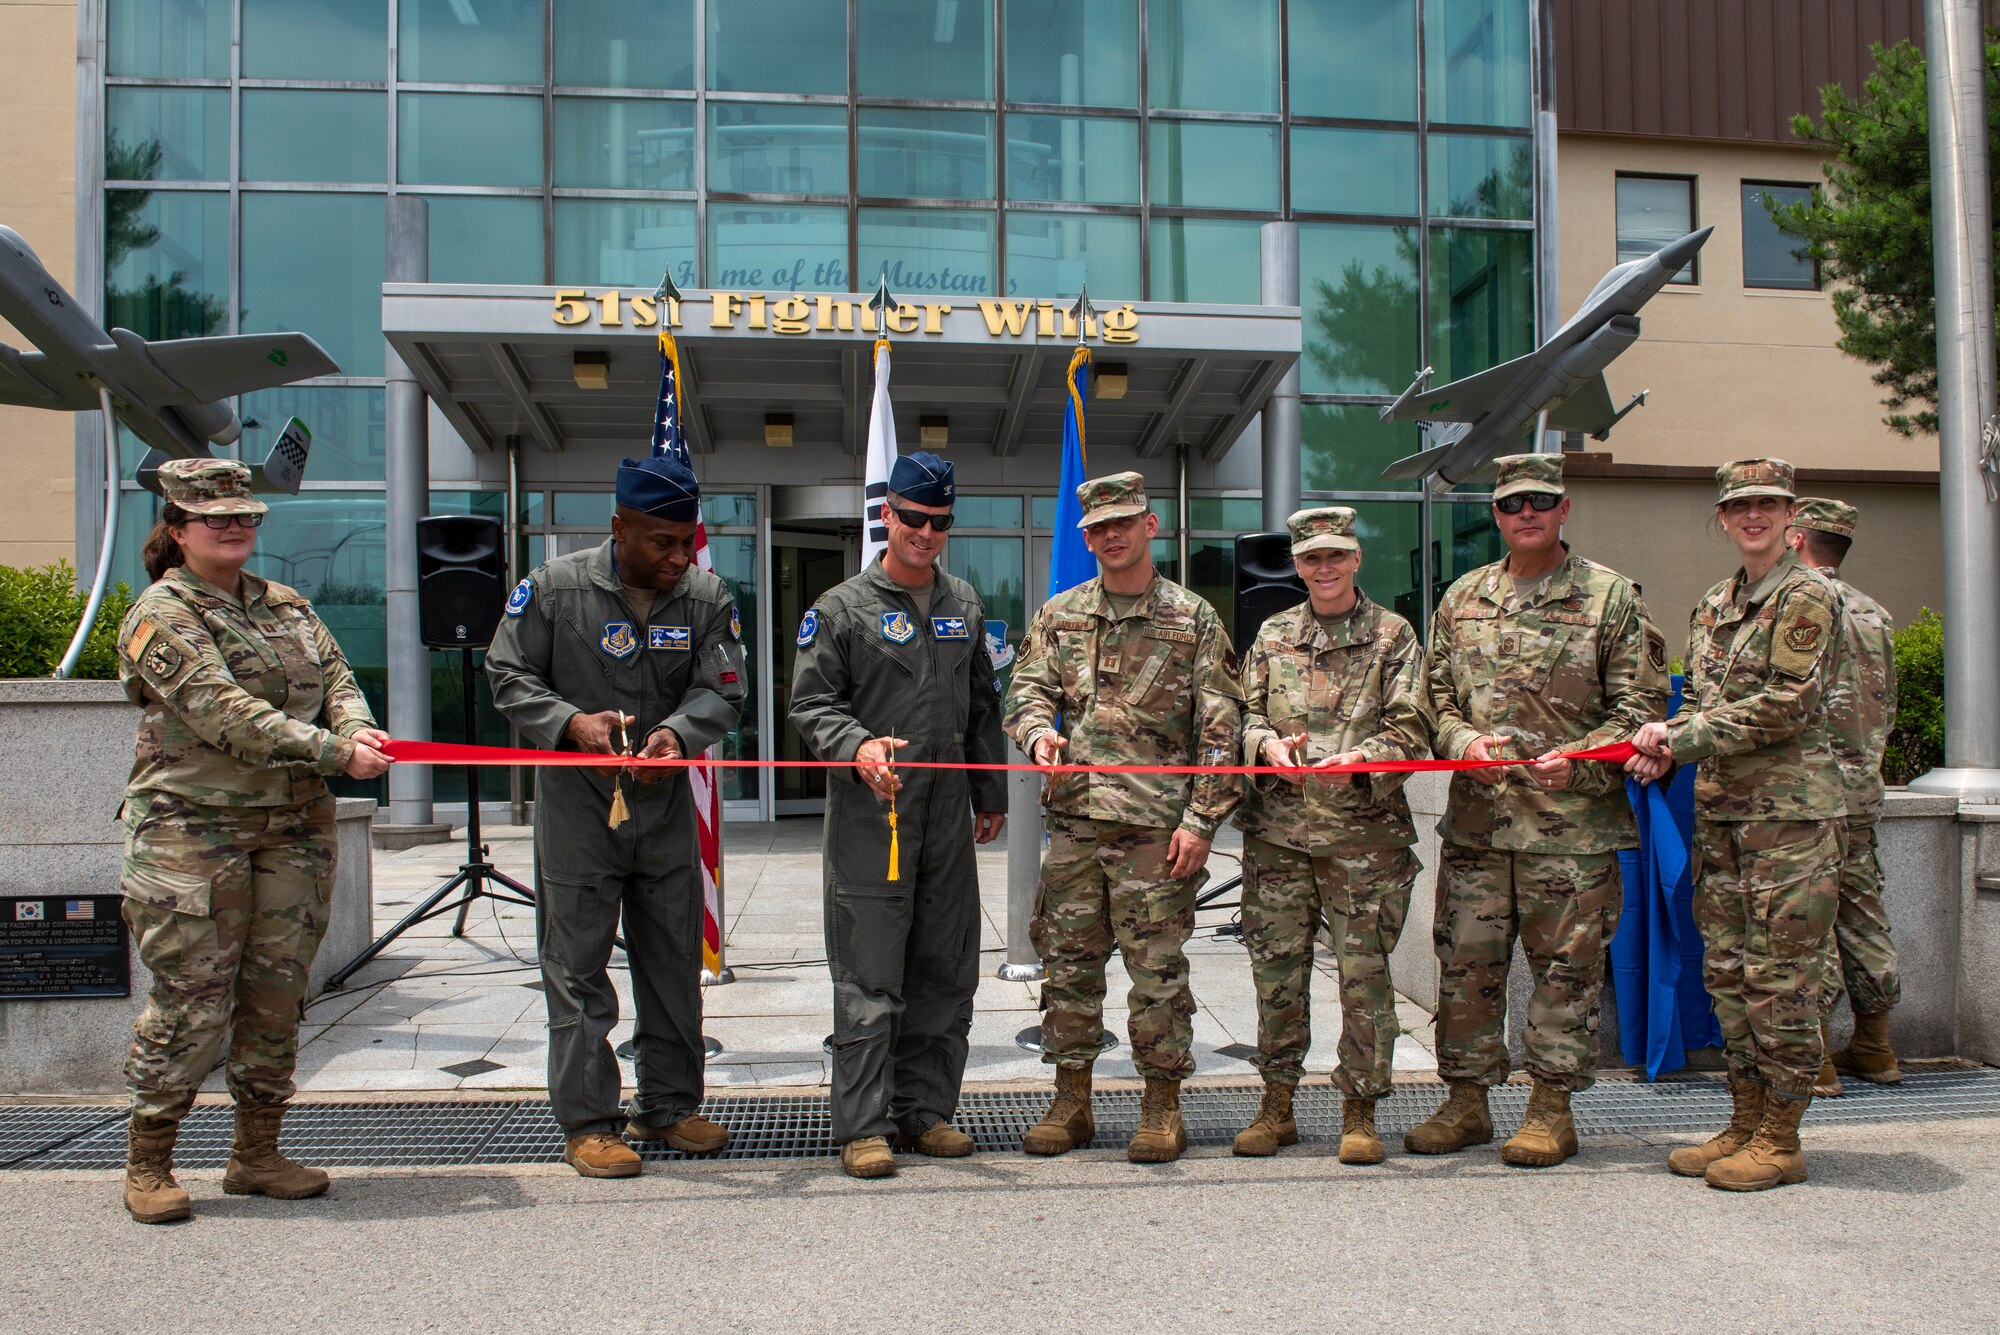 The 51st Fighter Wing held a renaming and ribbon cutting ceremony for its headquarters building at Osan Air Base, Republic of Korea, July 1, 2021. The building, which serves as the 51st Fighter Wing headquarters, was dedicated to Brig. Gen. Benjamin O. Davis Jr. in recognition of his 34 years of service that spanned across World War II, Vietnam, Korea and the Cold War.